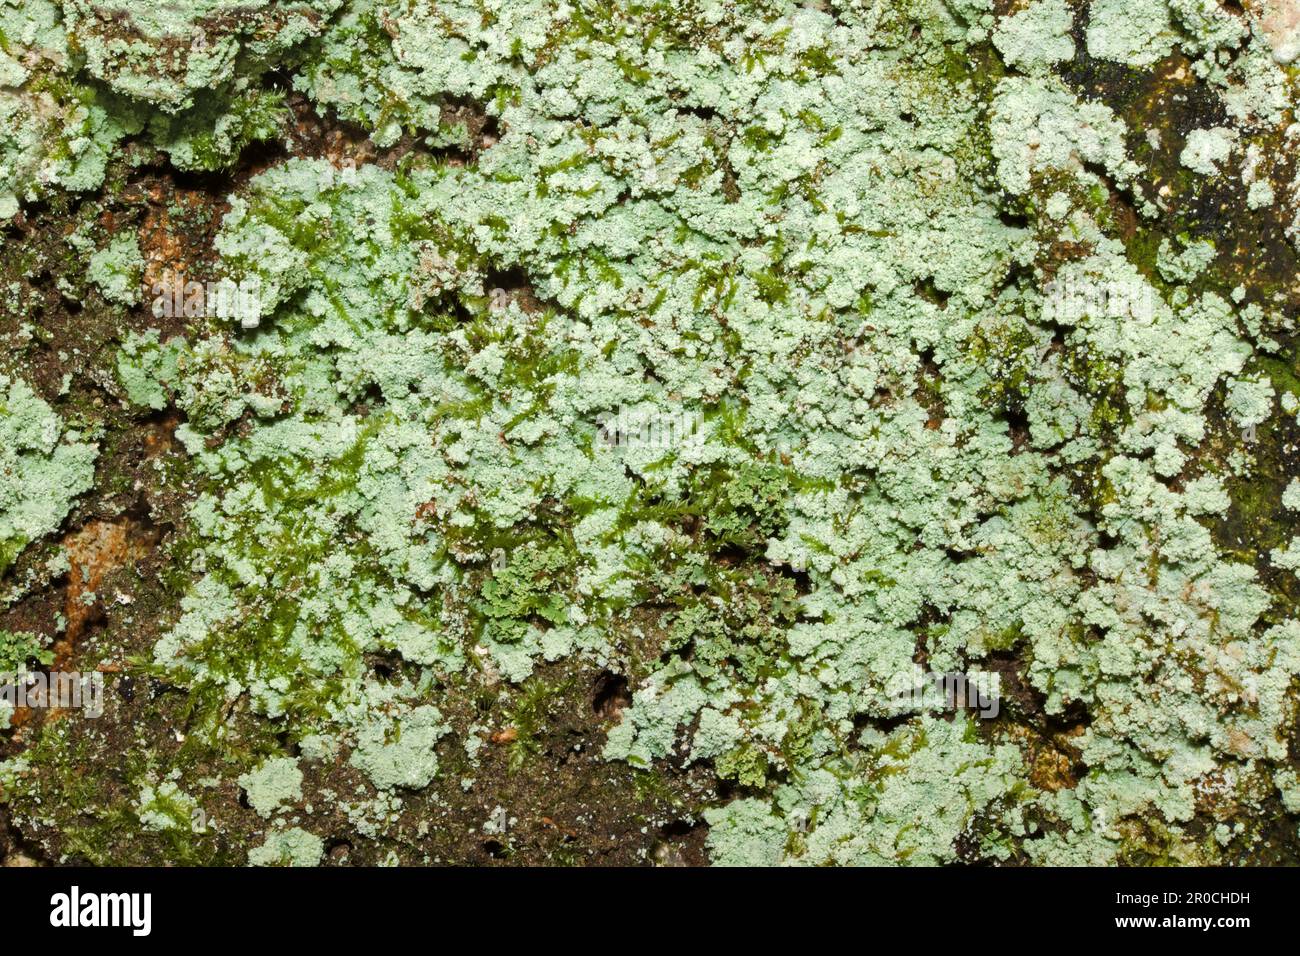 Lepraria incana is a dust lichen found on rock and bark in shady situations. It has a global distribution. Stock Photo